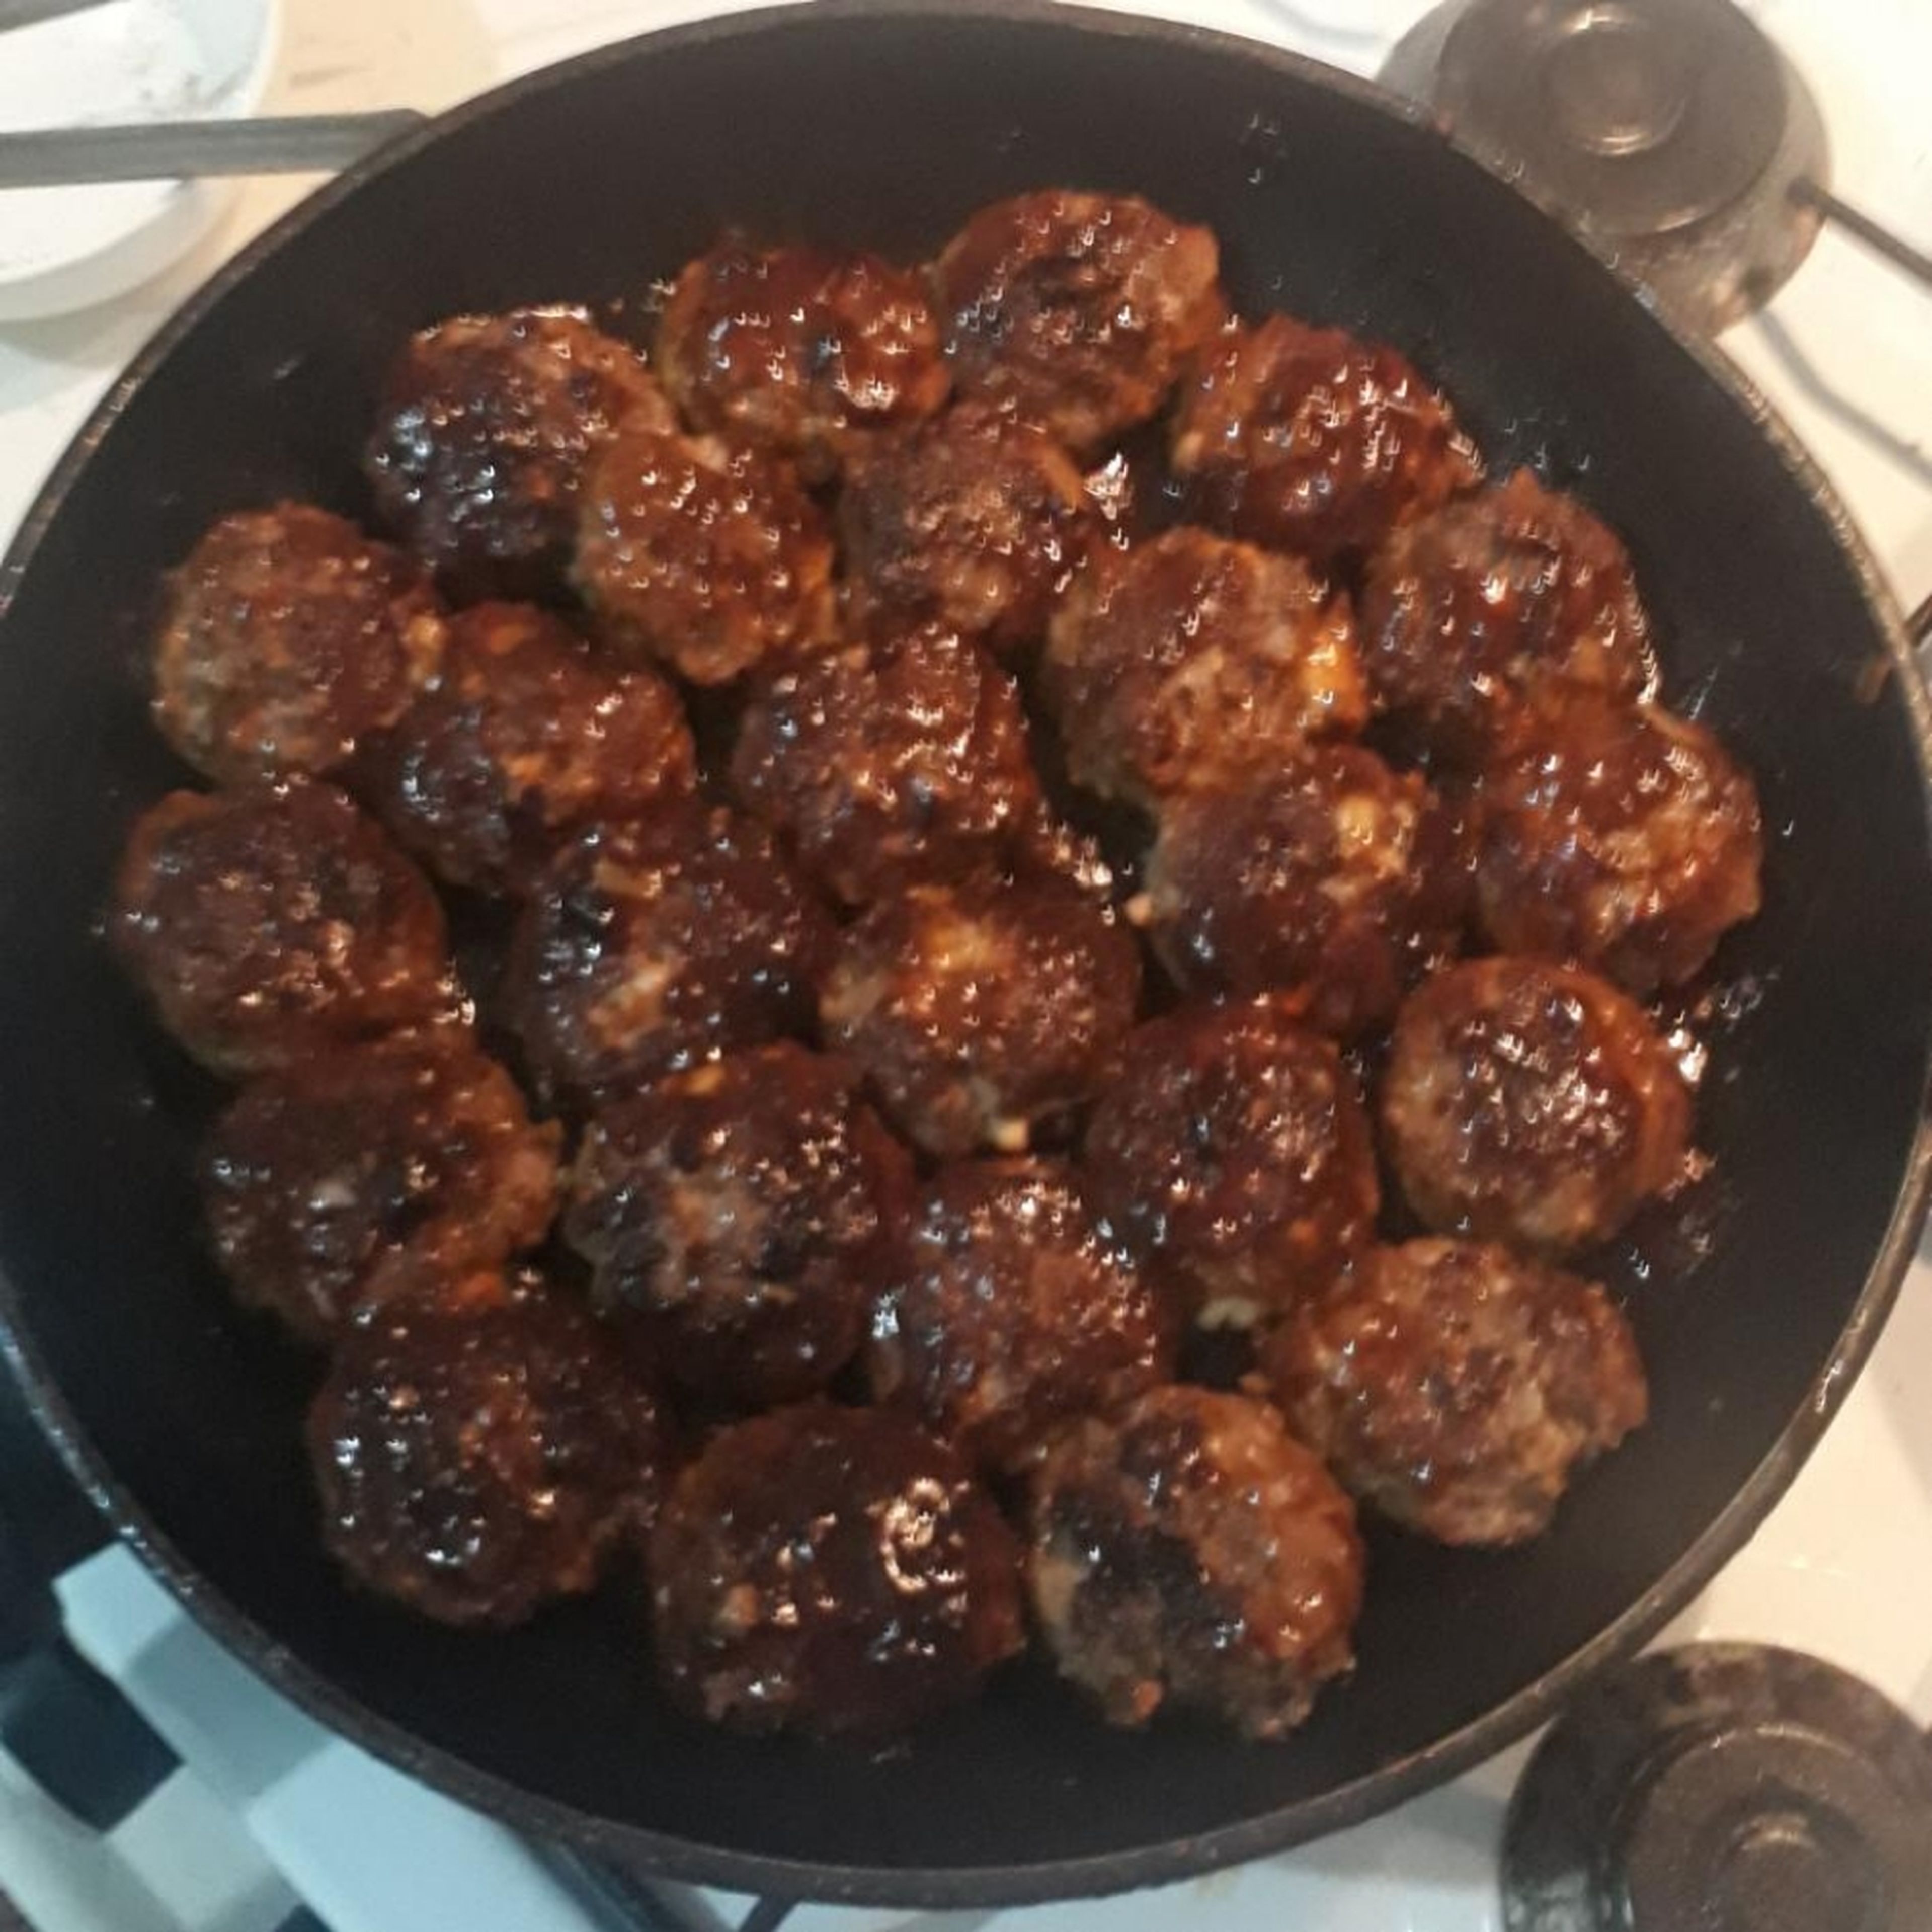 Finally turn off the oven, add meatballs and mix them.